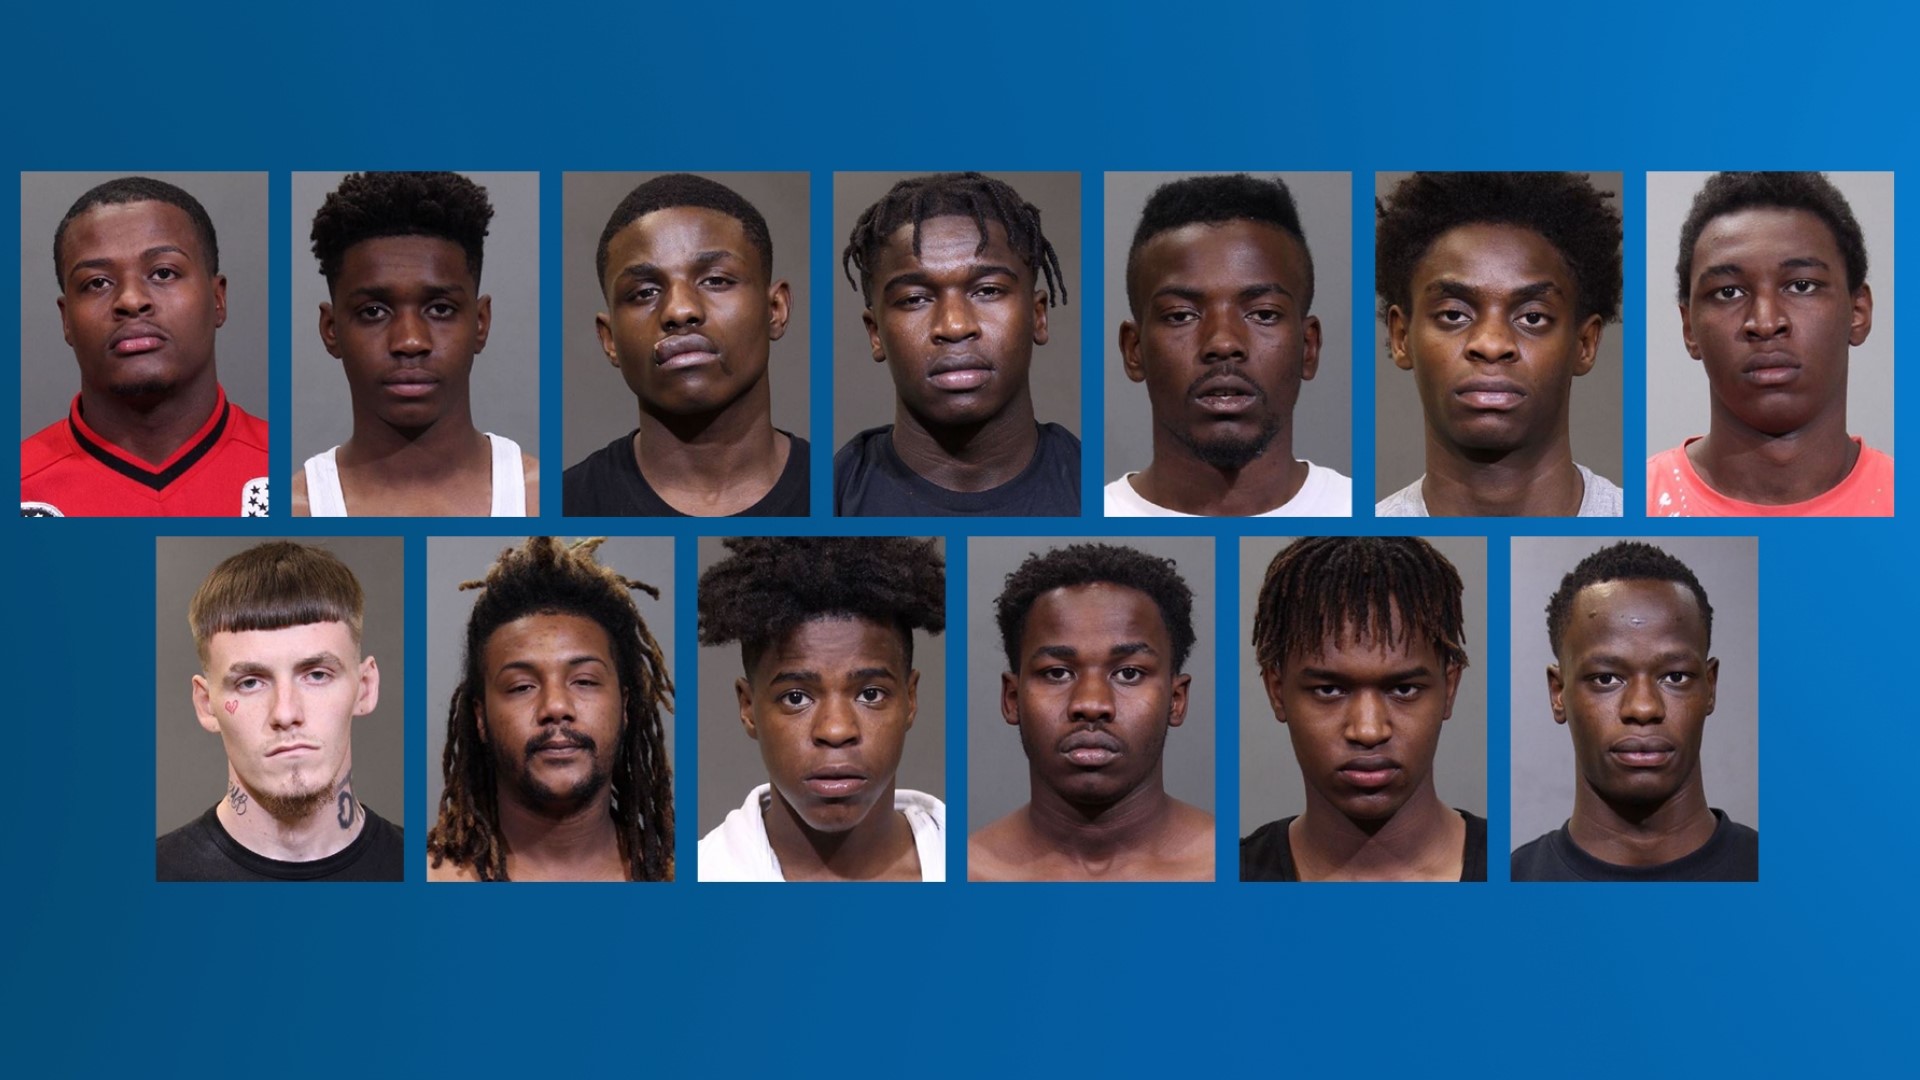 The Columbus Division of Police said they arrested members of the BL-800 gang who are responsible for numerous violent crimes in west Columbus.